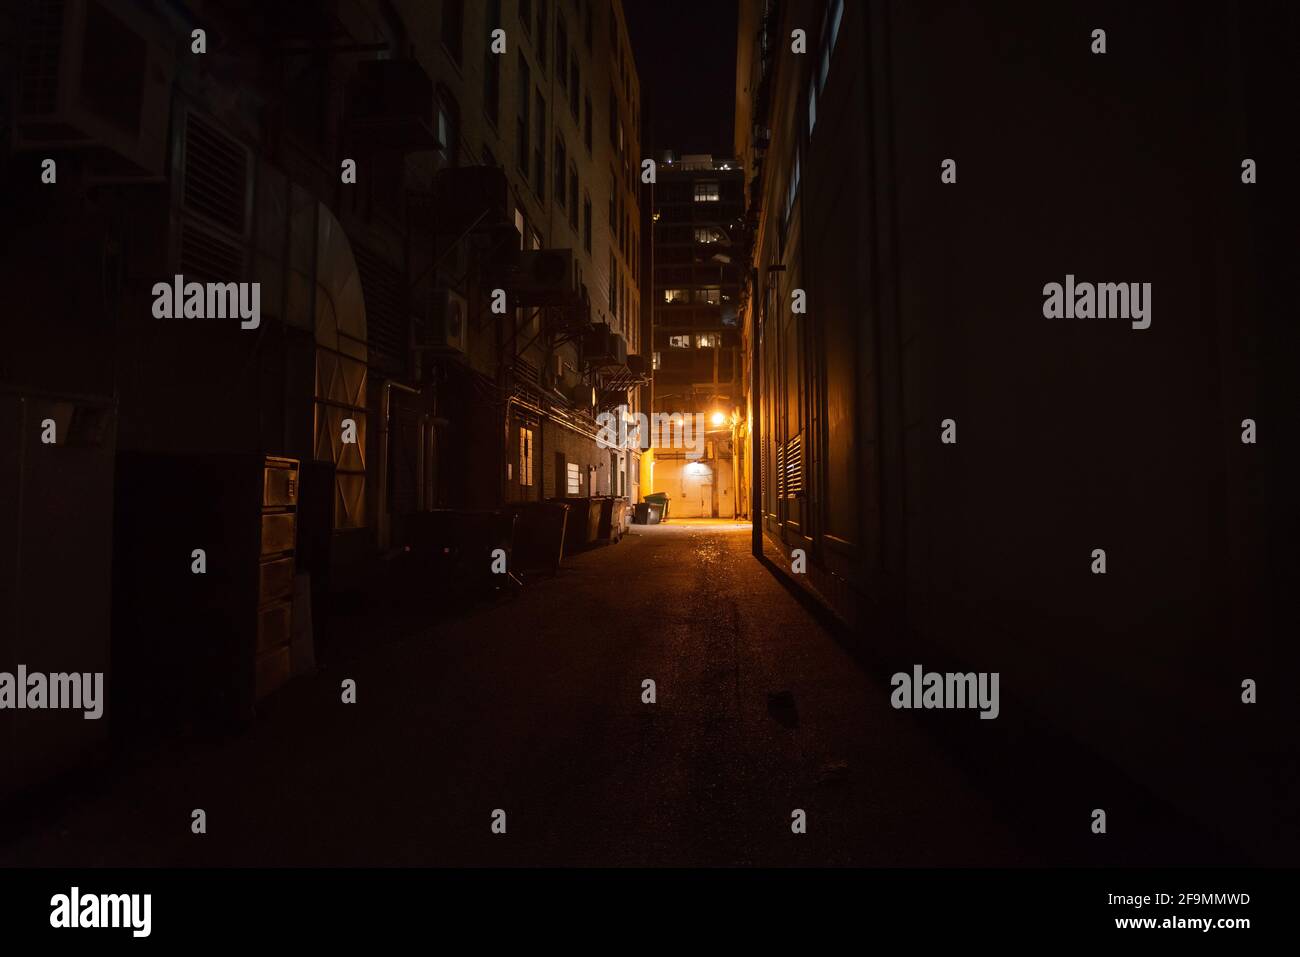 Dark and eerie urban city alley at night Stock Photo